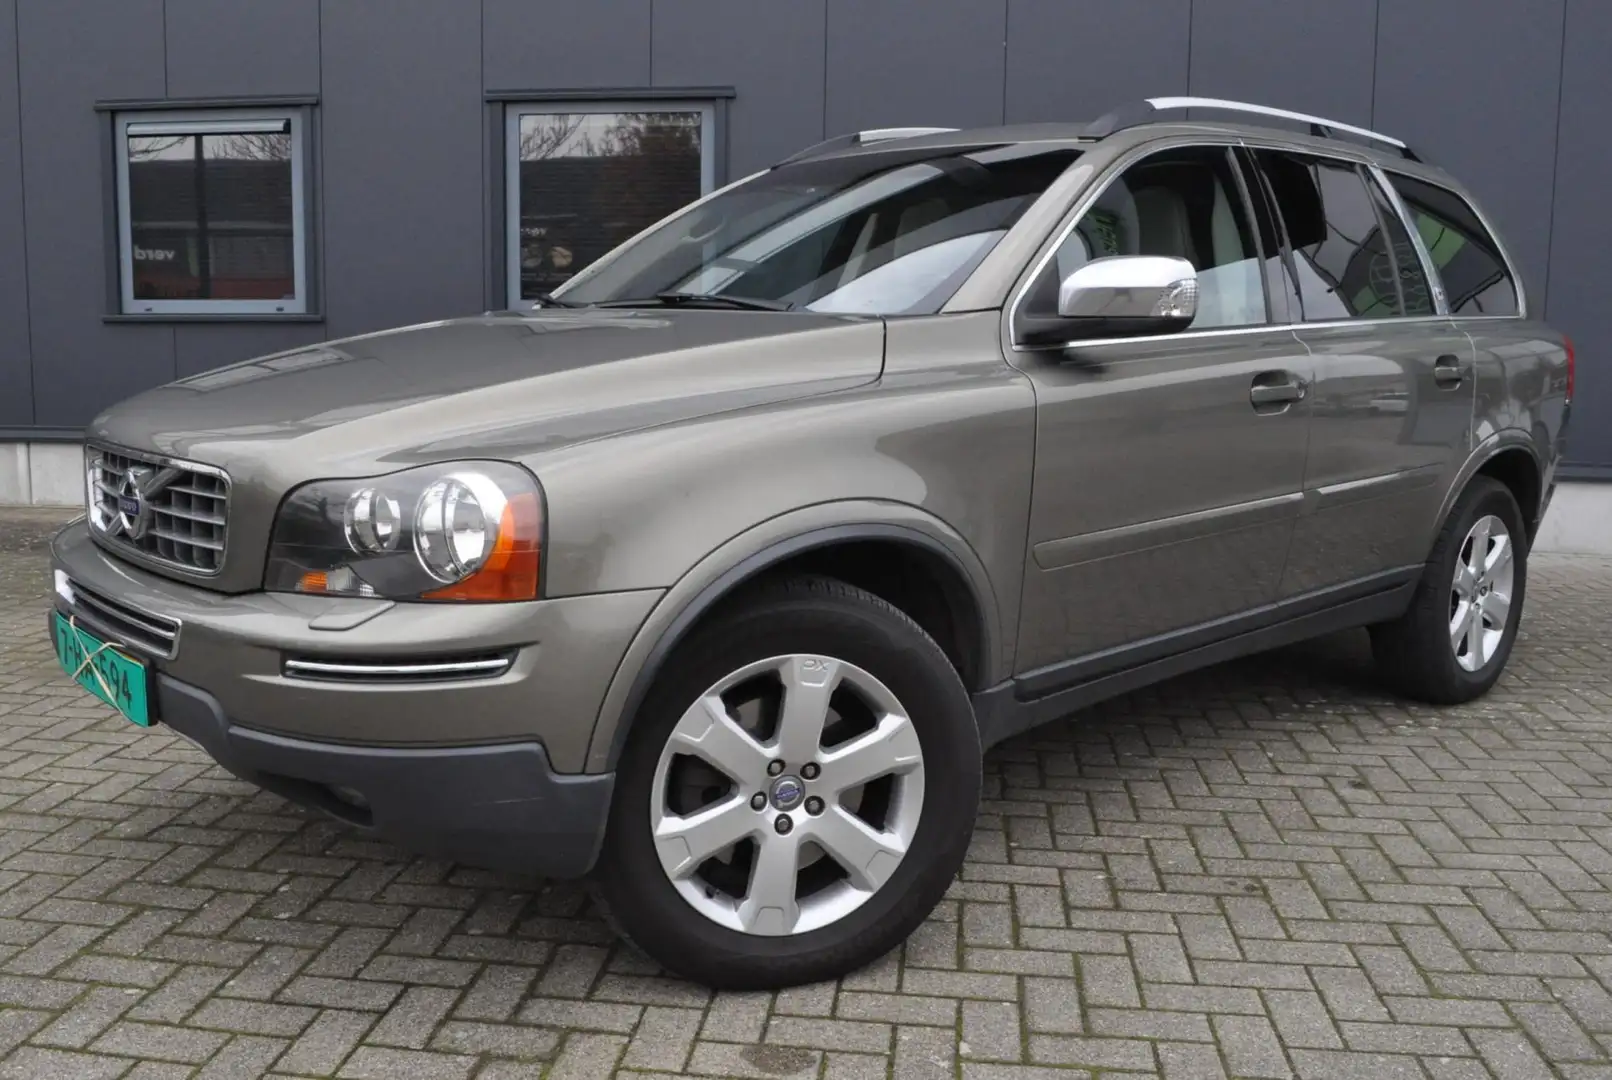 Volvo XC90 4.4 V8 Executive Edition, 188.000km, alle opties, Verde - 2